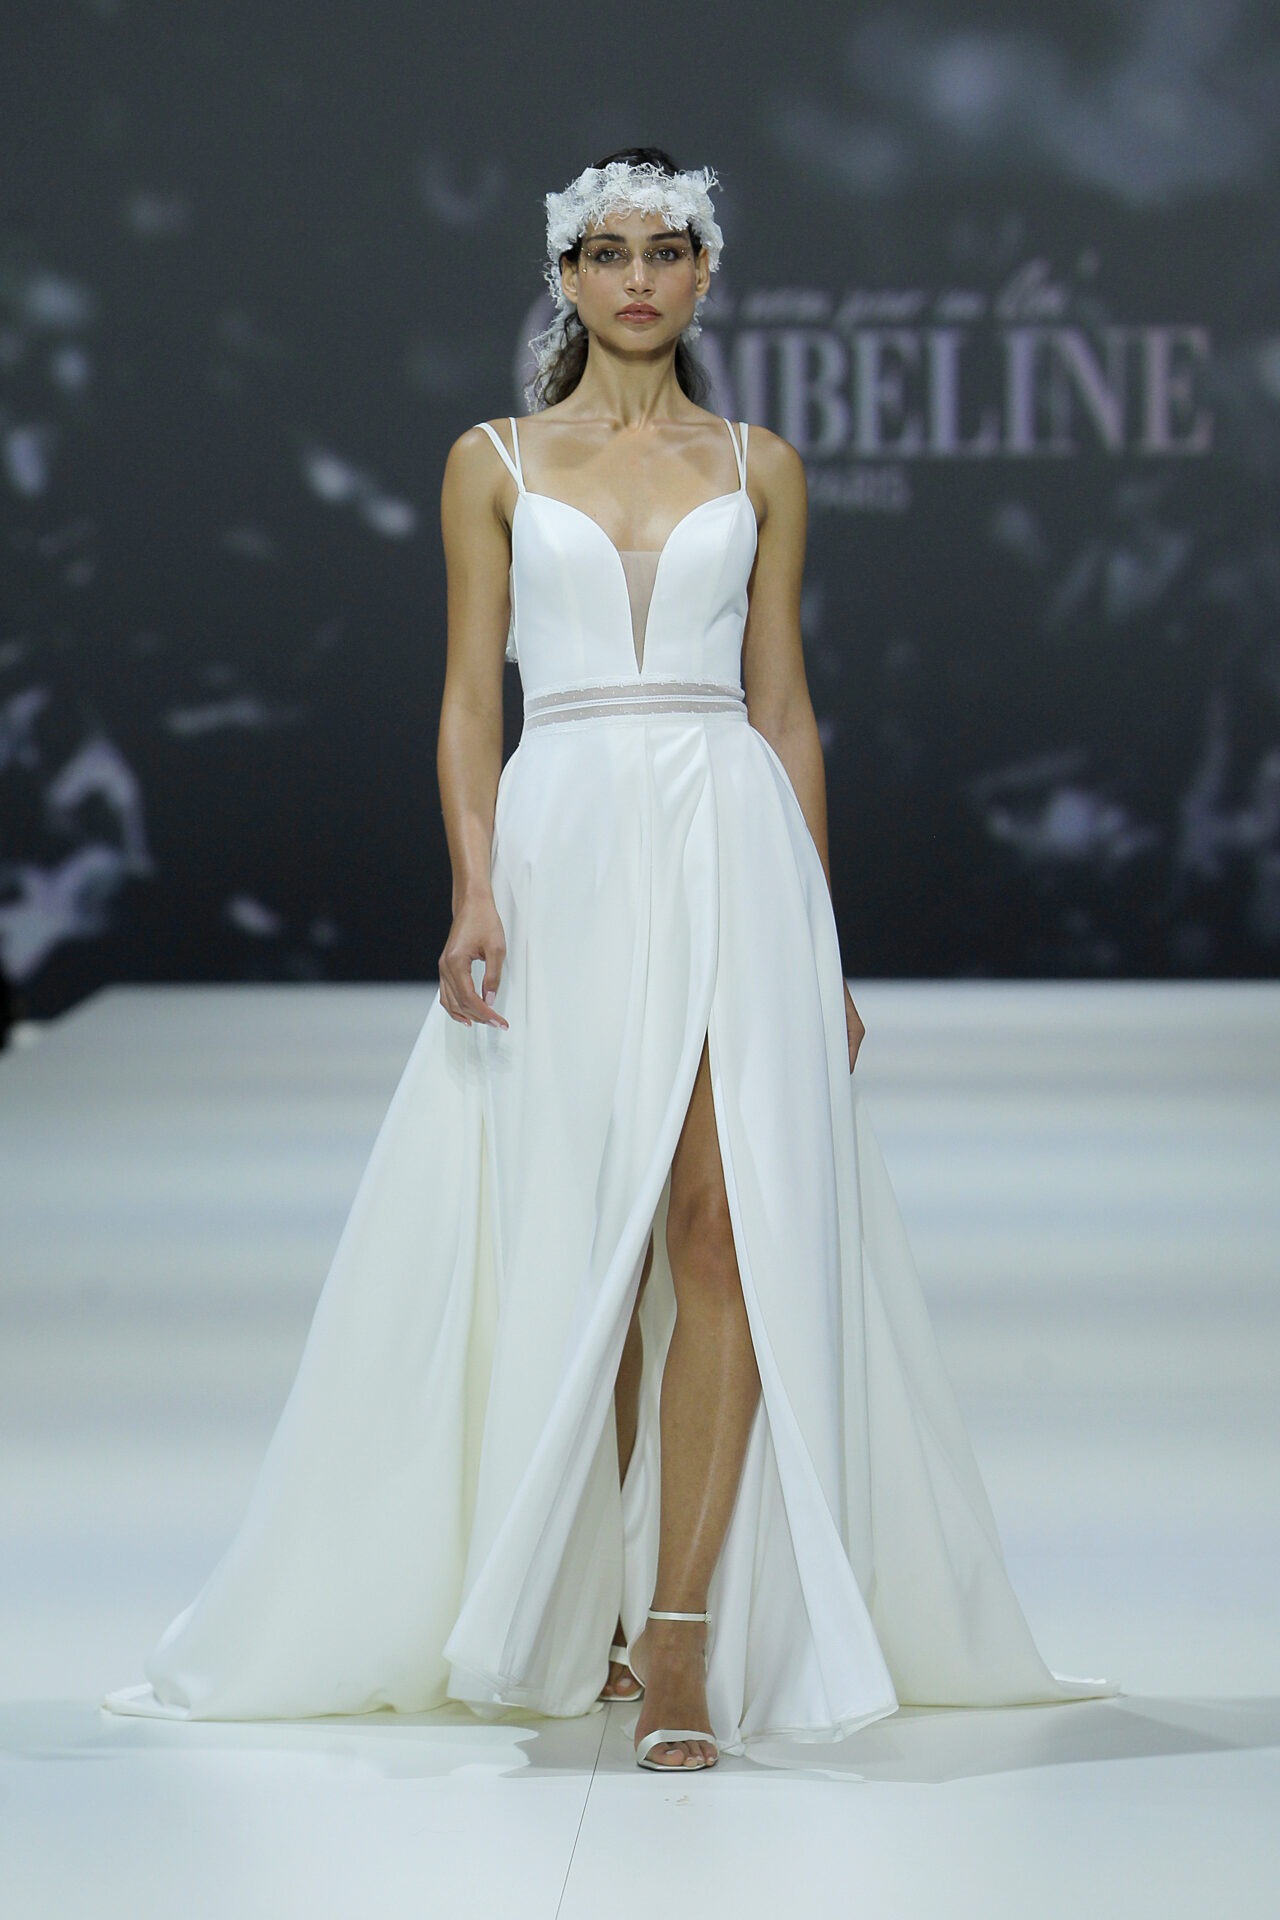 Watch live, at Barcelona Bridal Fashion Week - Rembo Styling